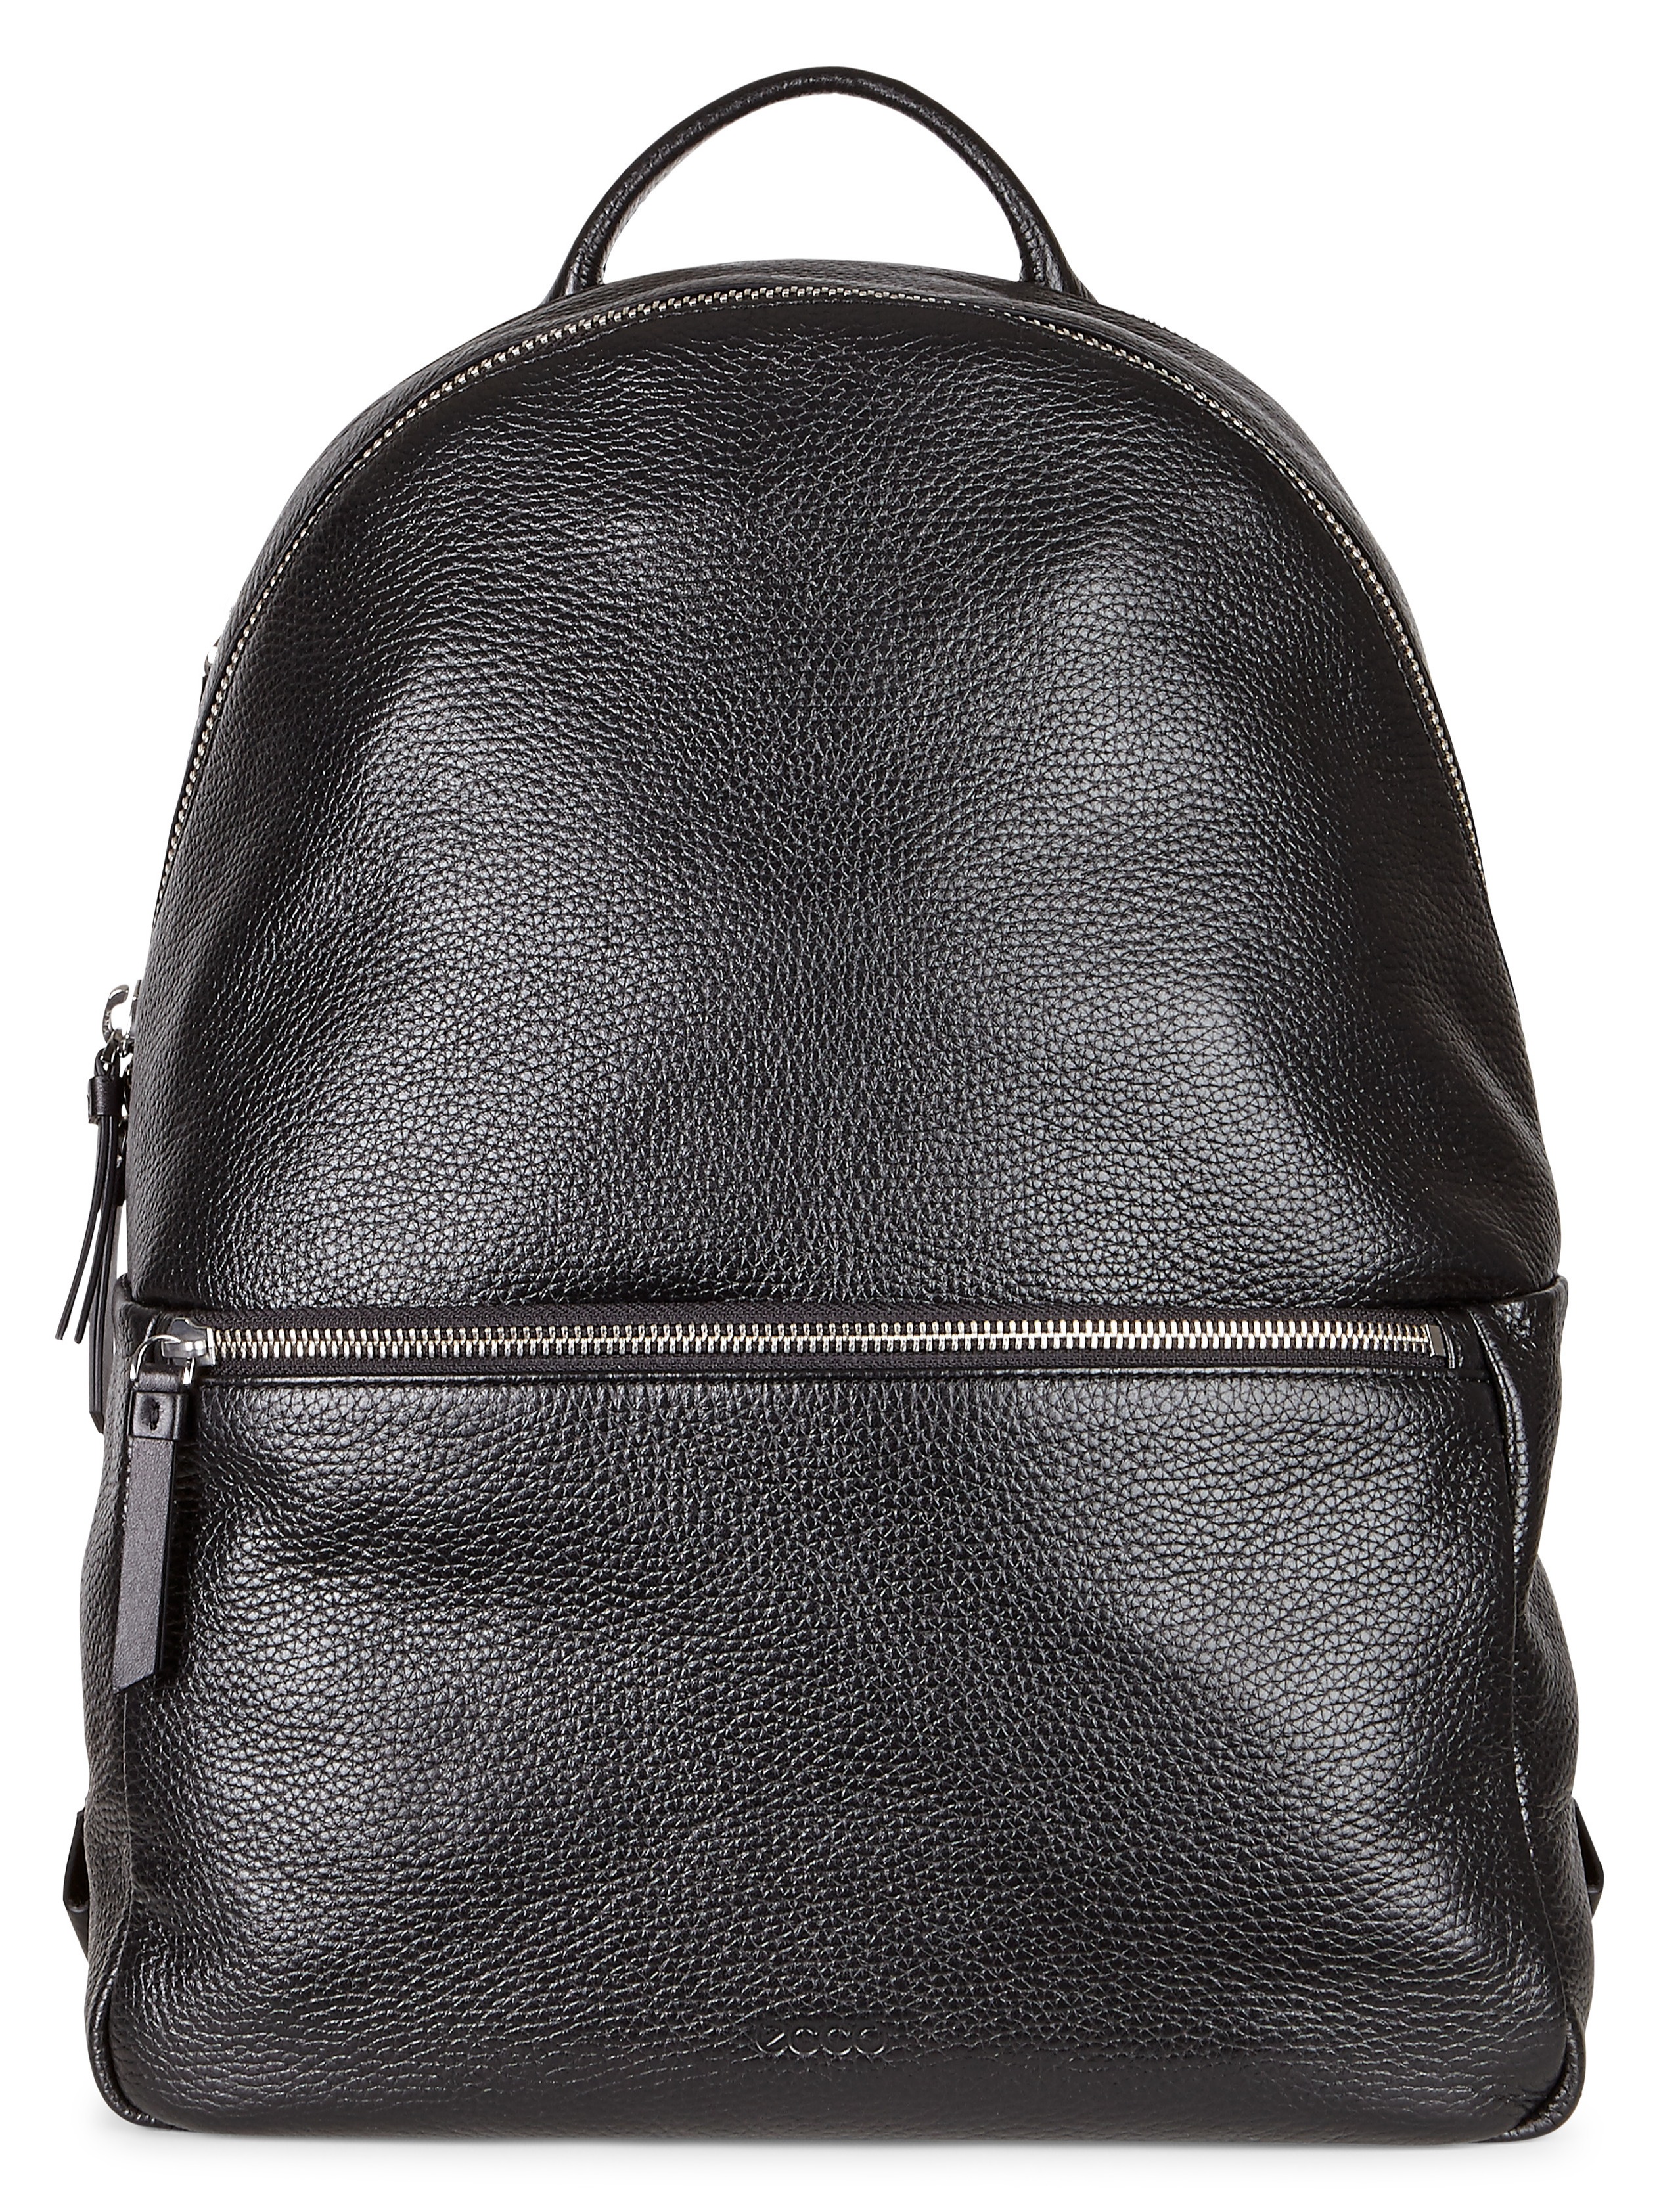 ECCO SP 3 Backpack 13 inch: Buy sell 